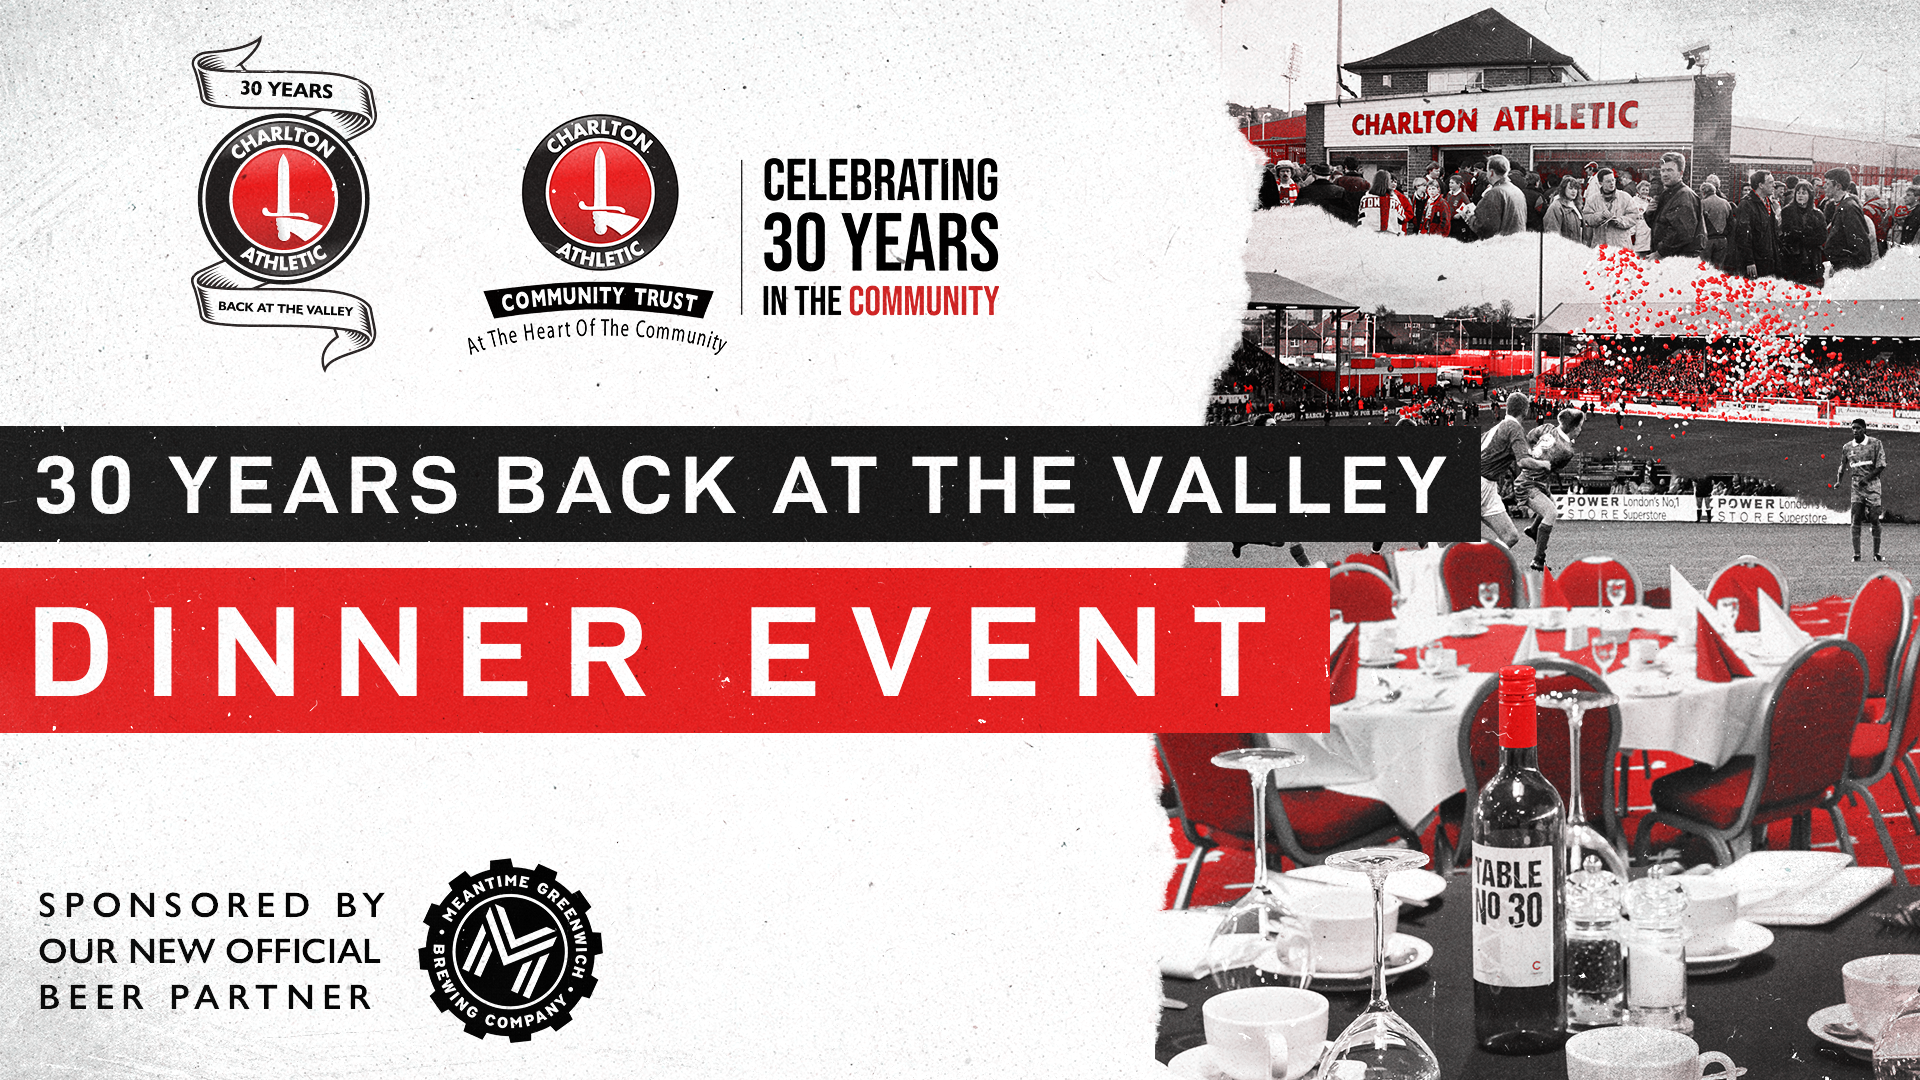 30 Years Back At The Valley dinner event poster